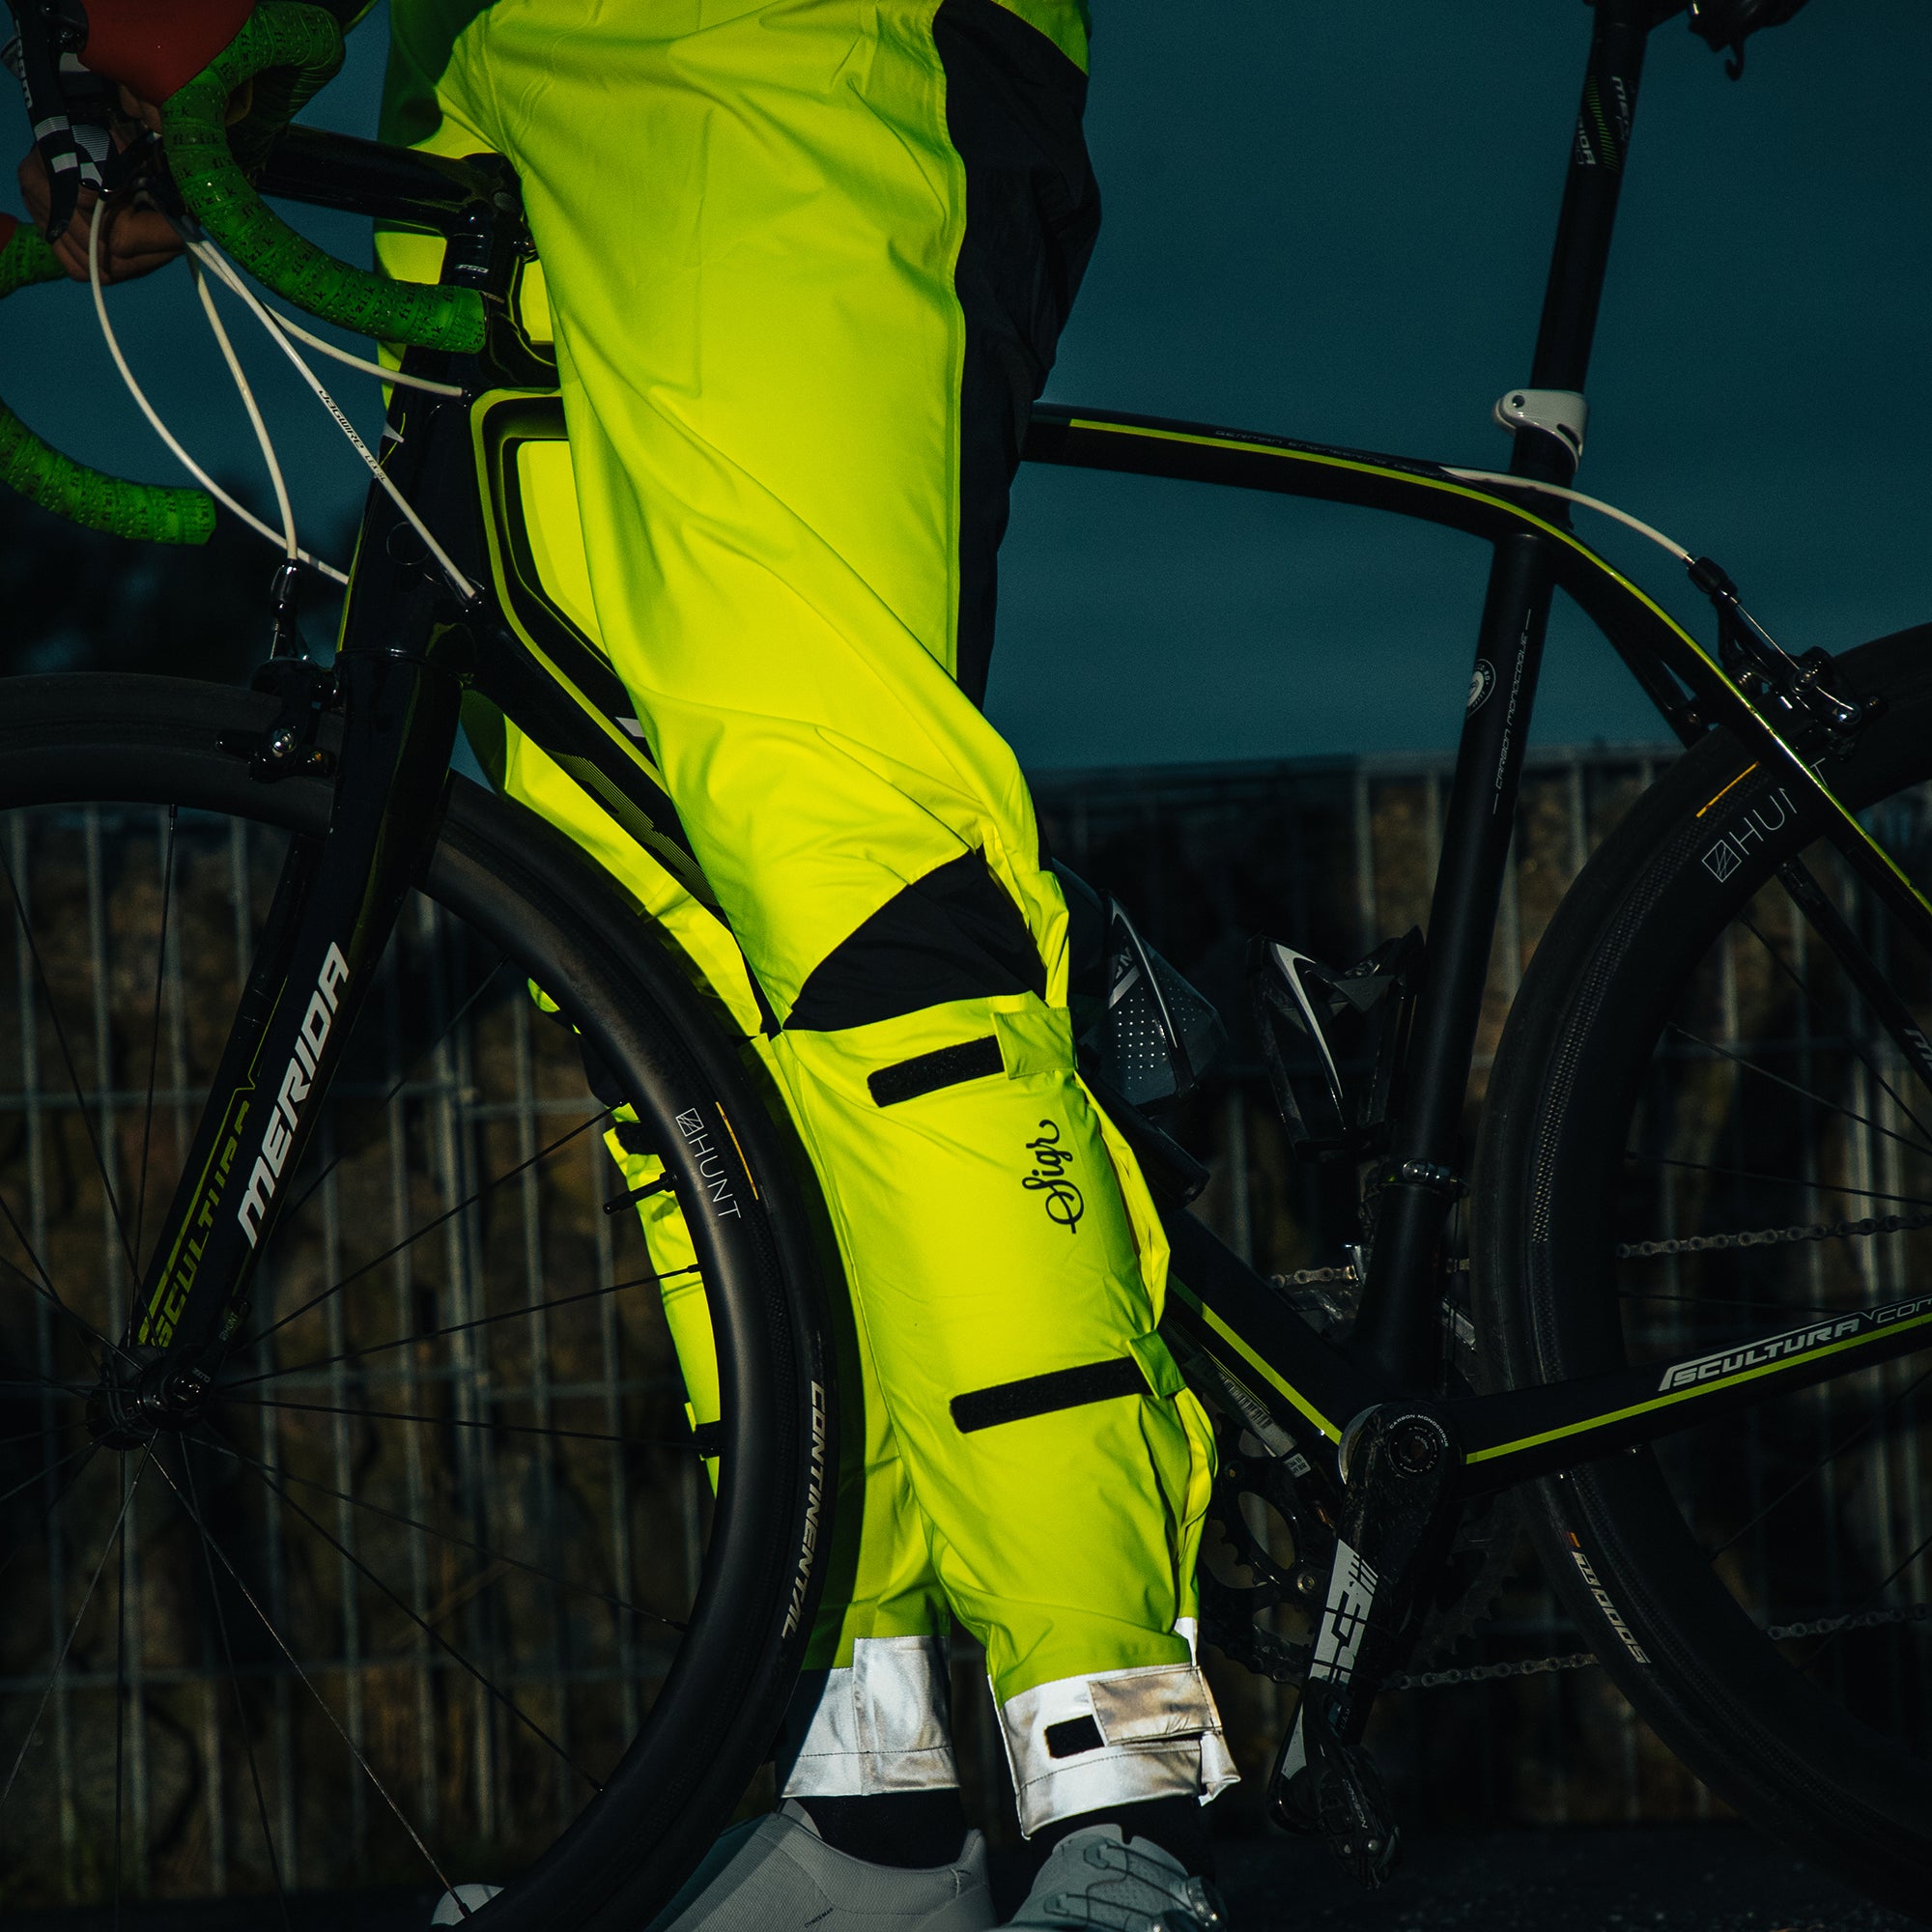 Best Waterproof Clothing for Cycling Commuters - The Edge Sports Cork